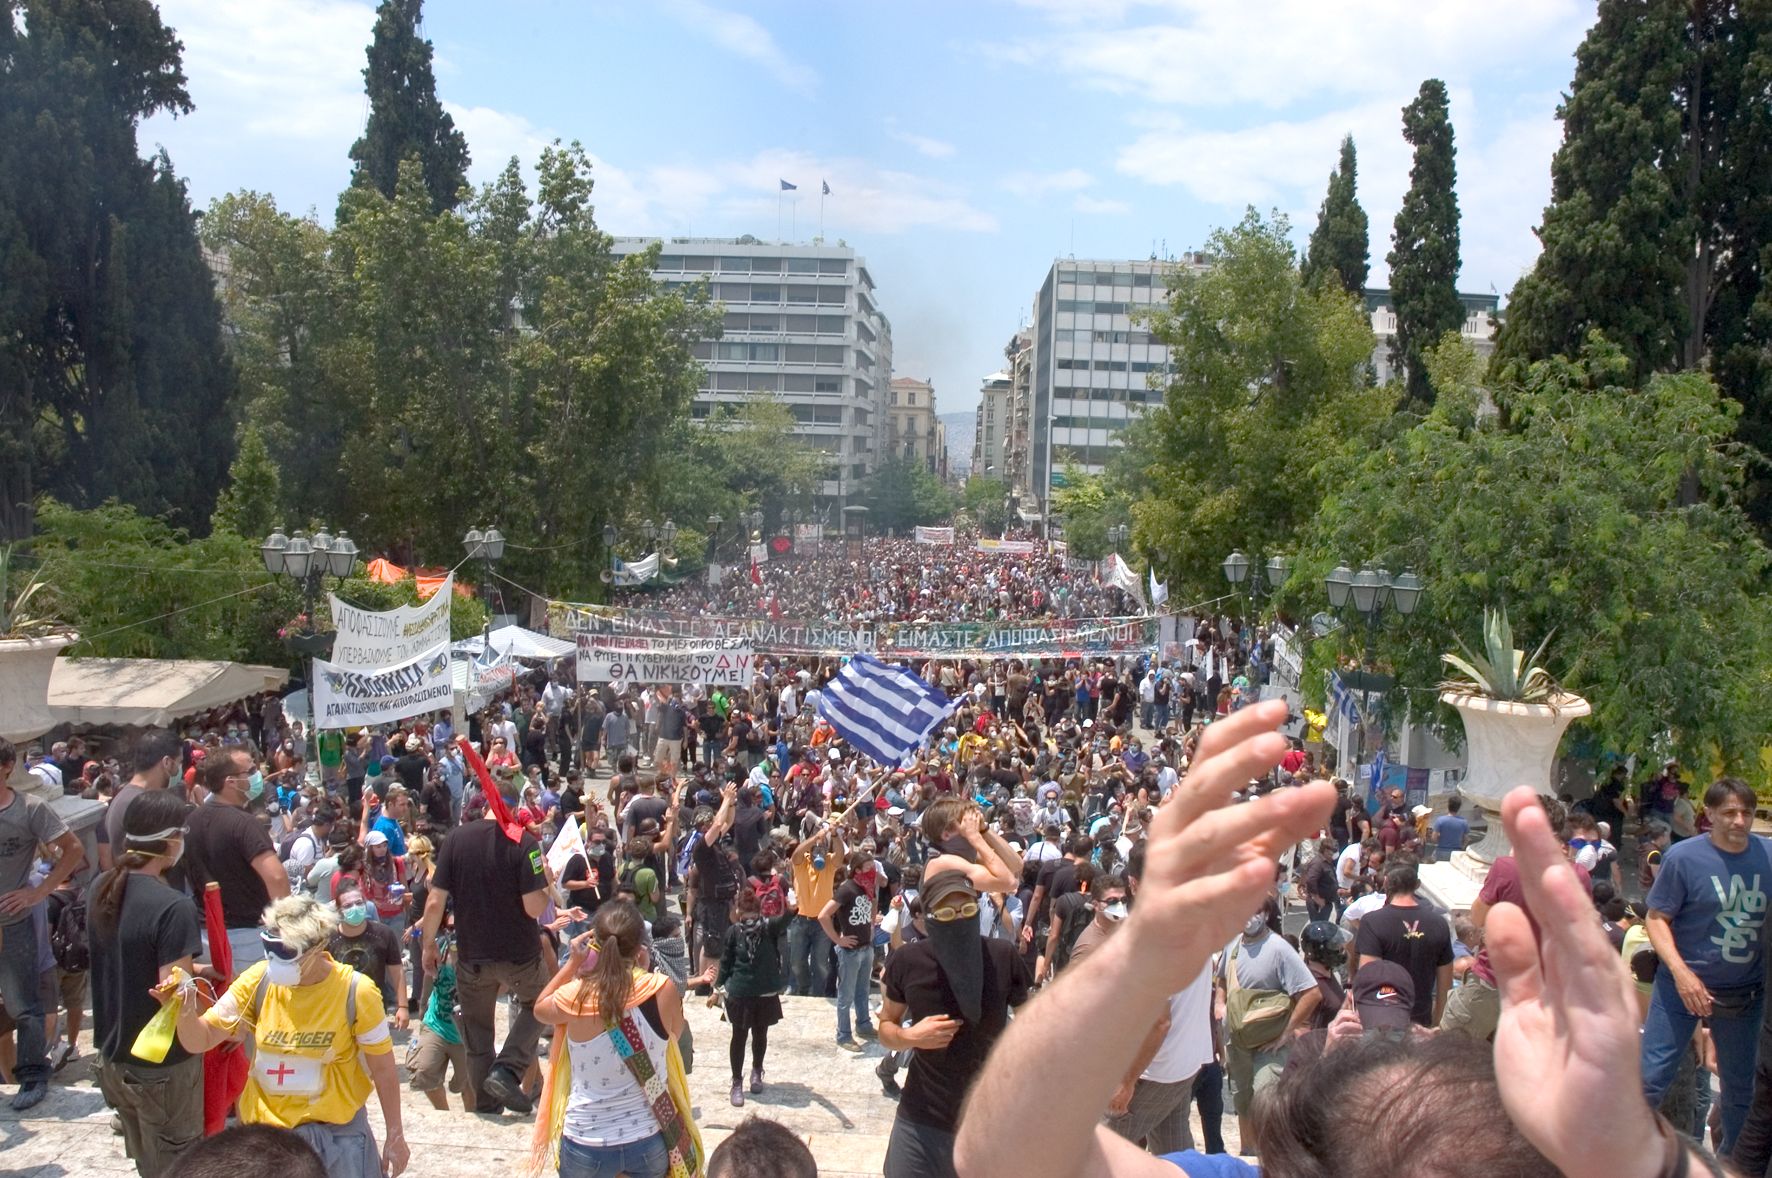 Demonstrators gather to protest the memorandum which is before the parliament on the second day of an historic 48 hour general strike. Athens, Greece. June 29, 2011.